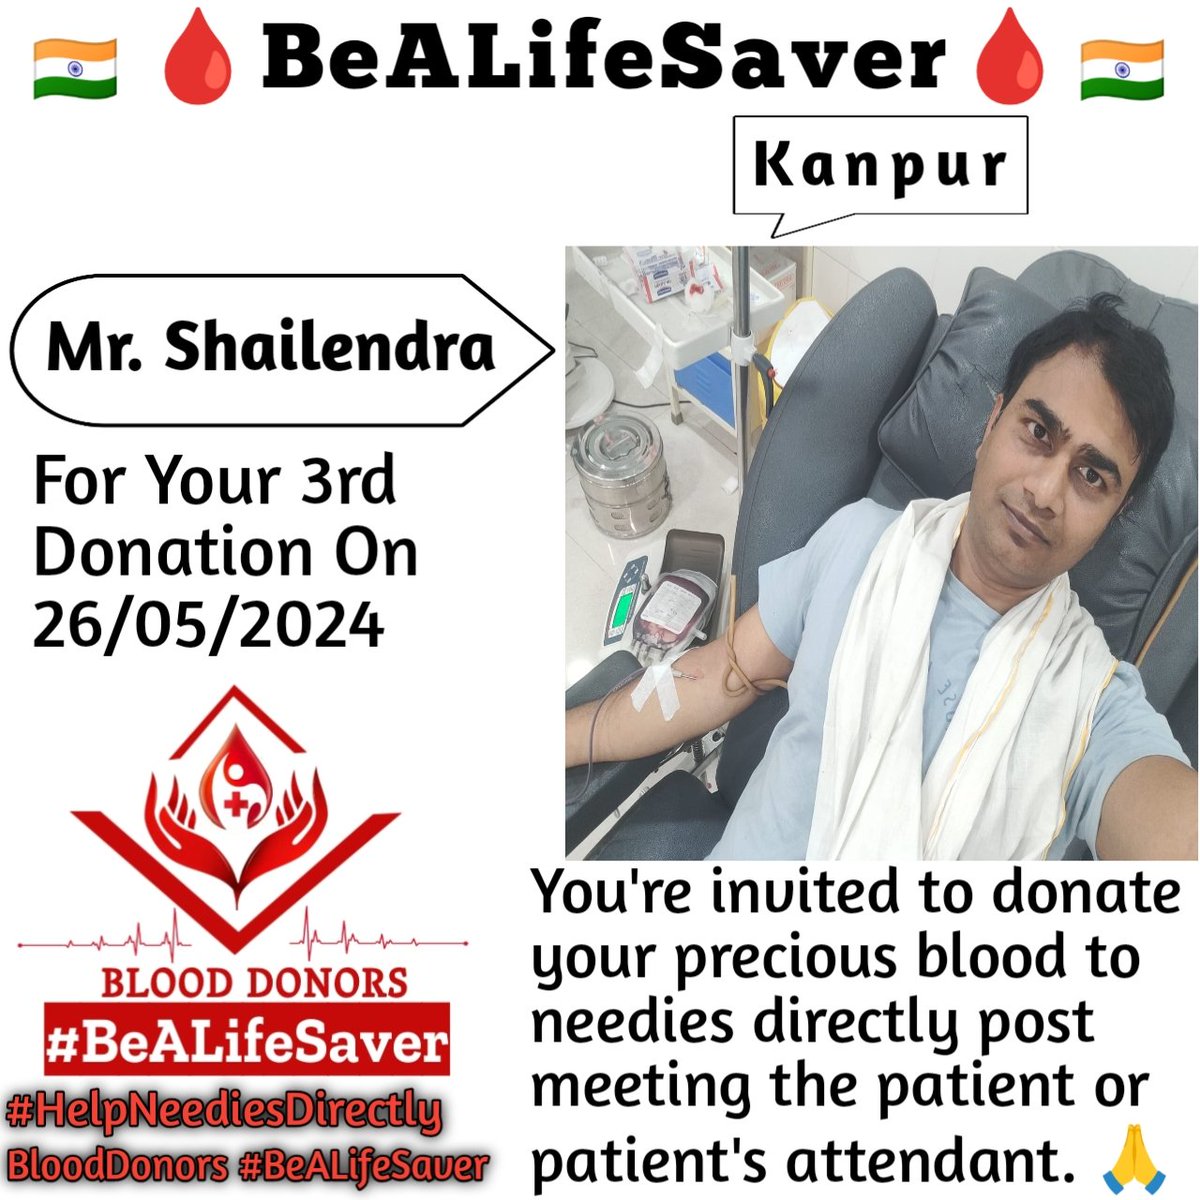 🙏 Congrats For 3rd Blood Donation 🙏 Kanpur BeALifeSaver Kudos_Mr_Shailendra_Ji Today's hero Mr. Shailendra Ji donated blood in Kanpur for the 3rd Time for one of the needies. Heartfelt Gratitude and Respect to Shailendra Ji for his blood donation for Patient admitted in Kanpur